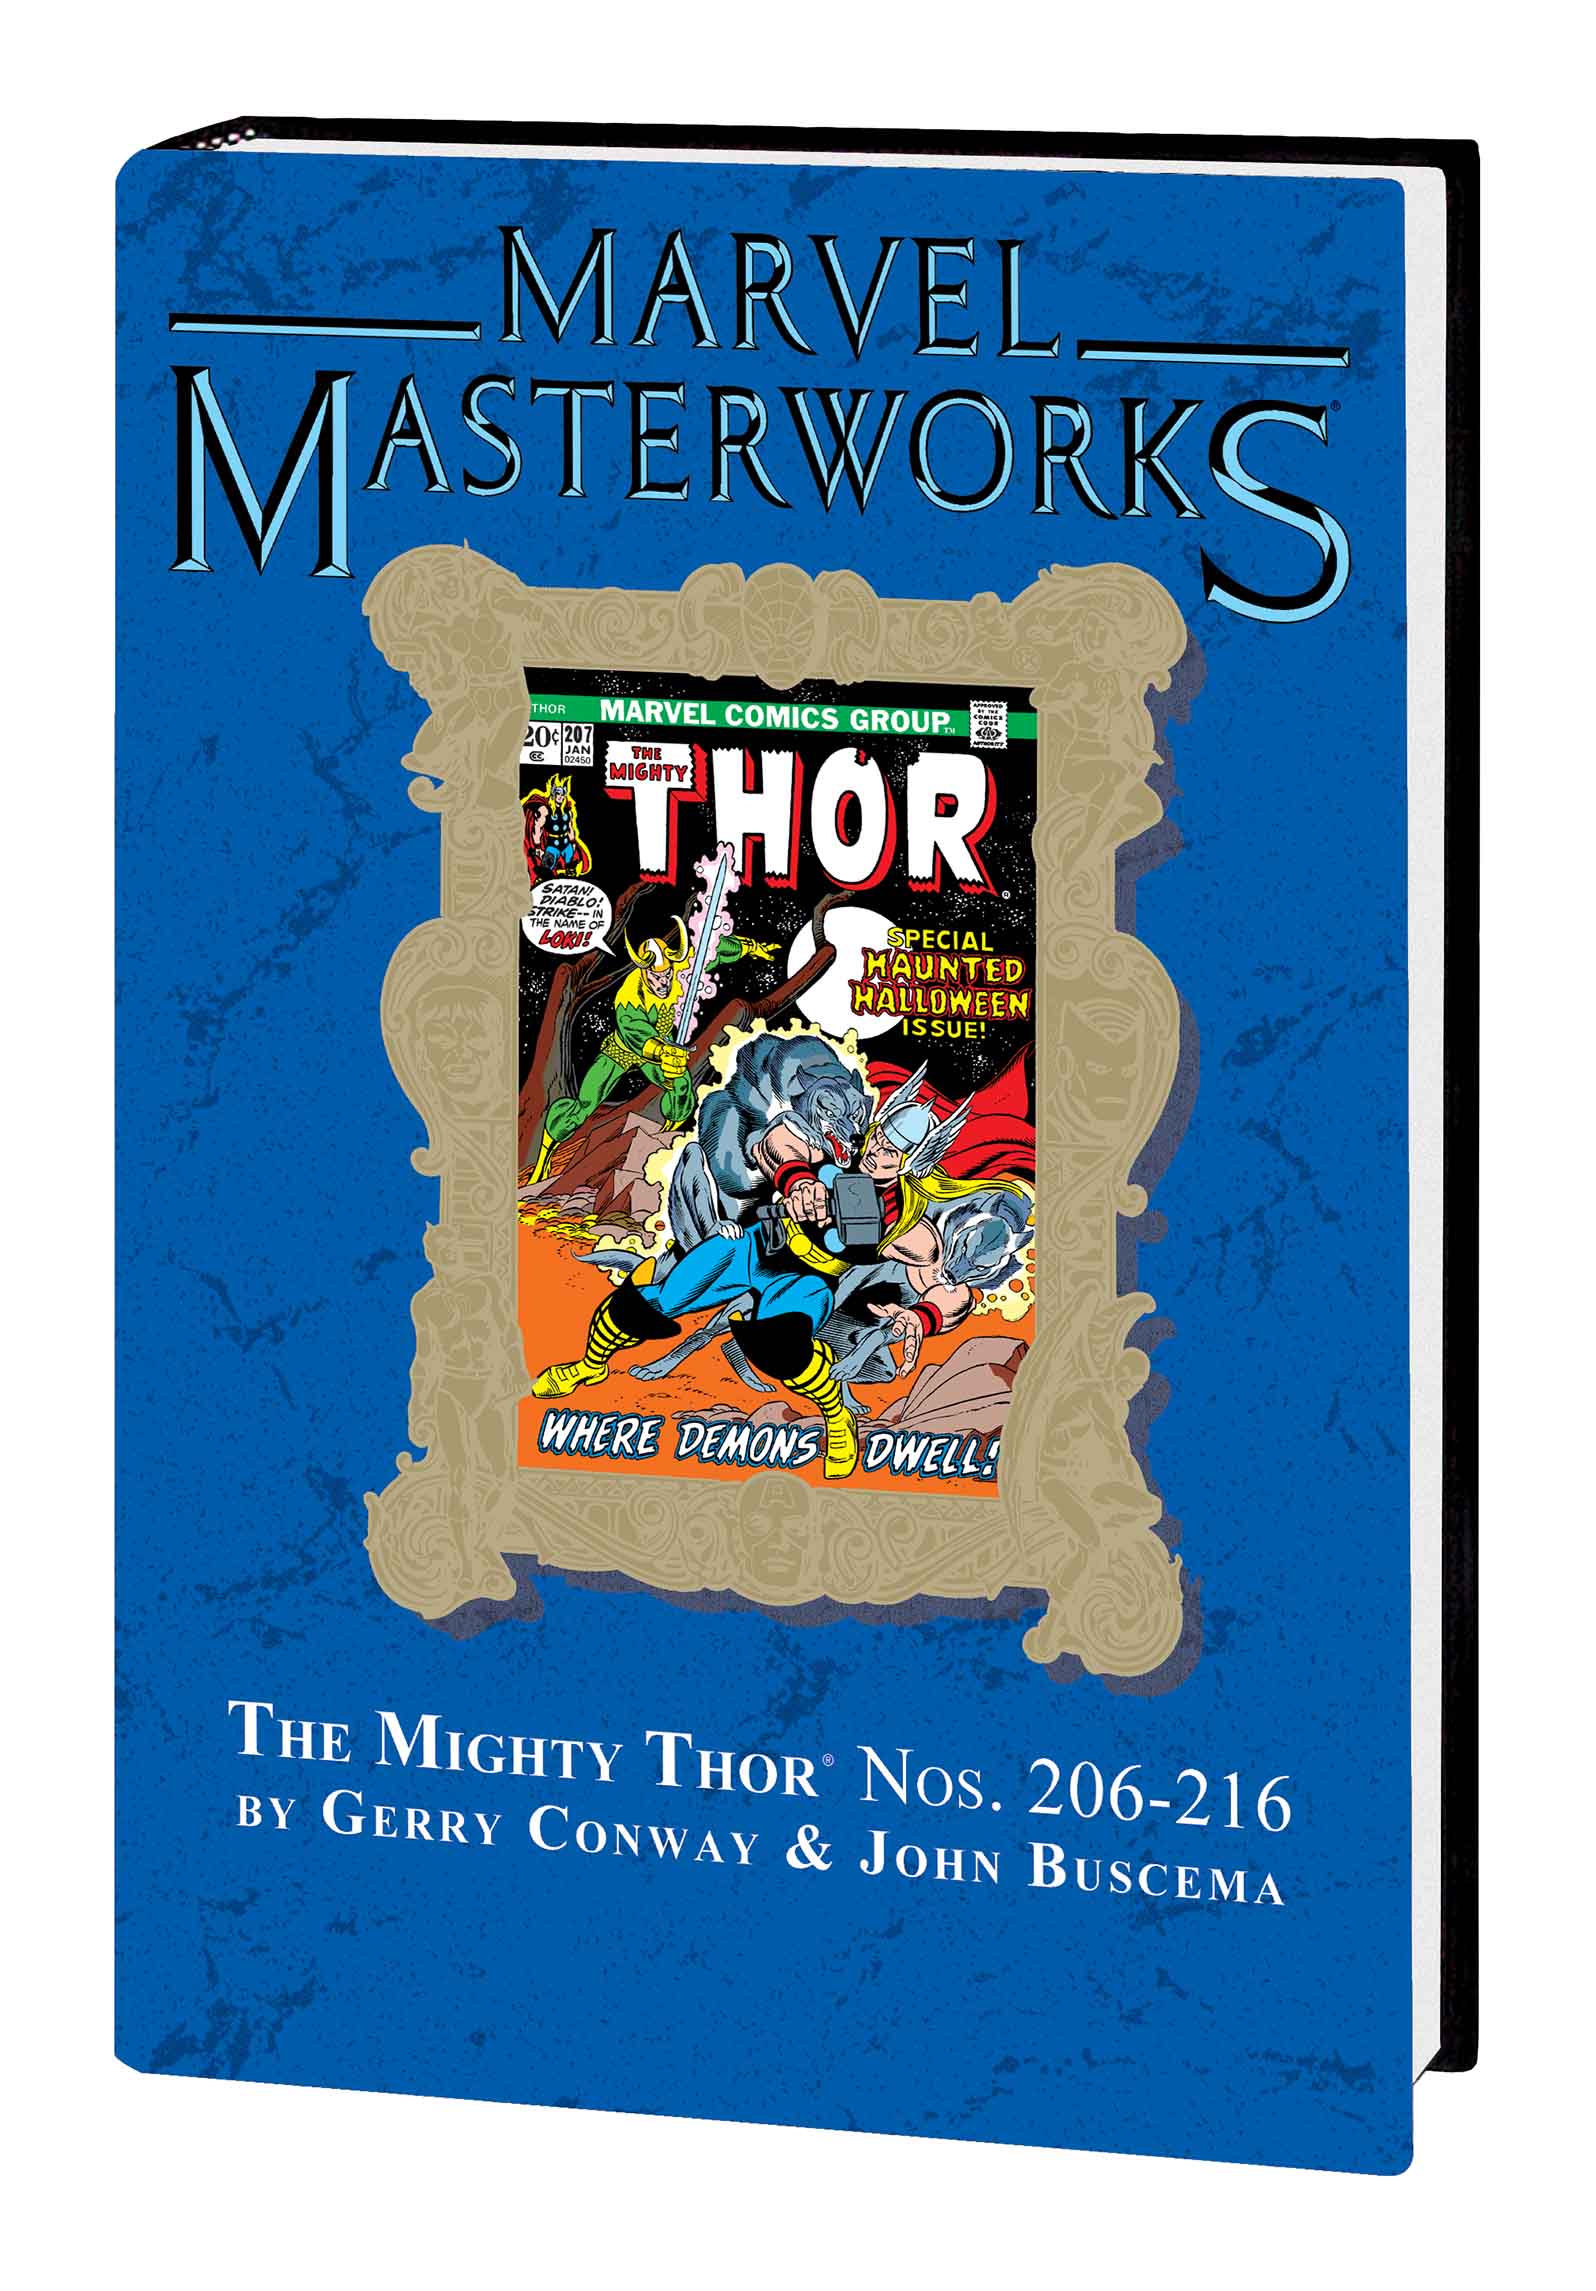 MARVEL MASTERWORKS: THE MIGHTY THOR VOL. 12 HC VARIANT (DM ONLY) (Hardcover)